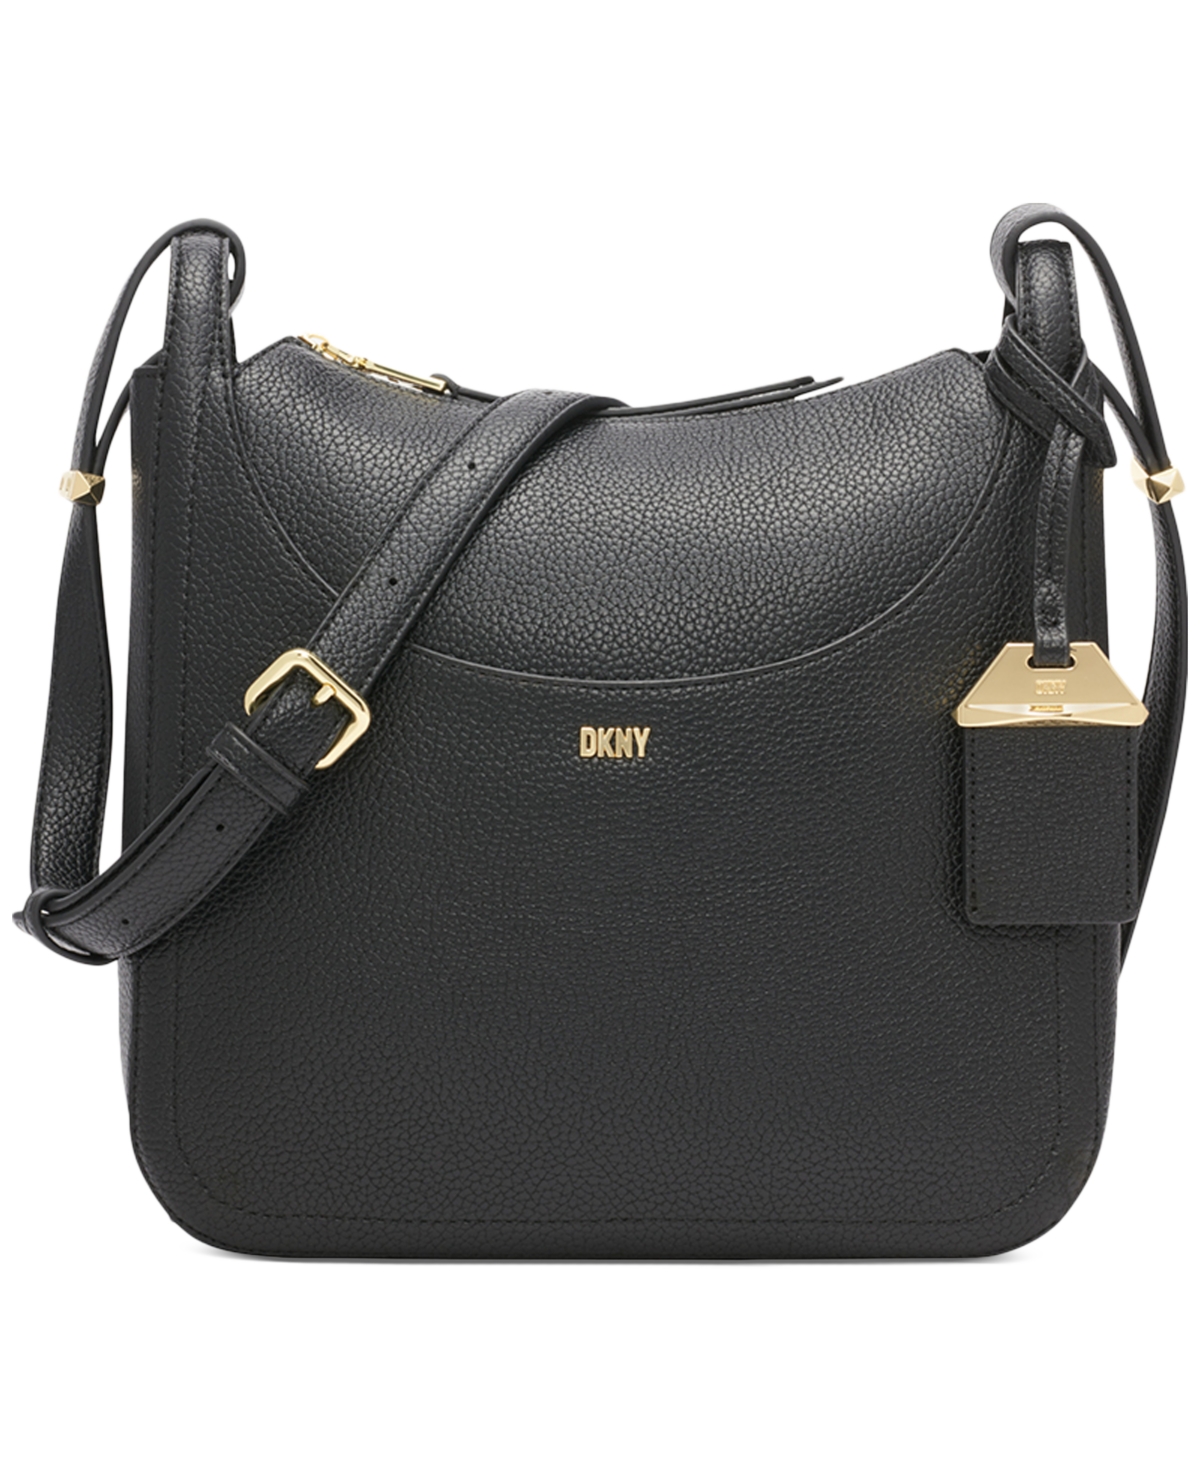 Dkny Barbara Small Zip Top Messenger In Black,gold